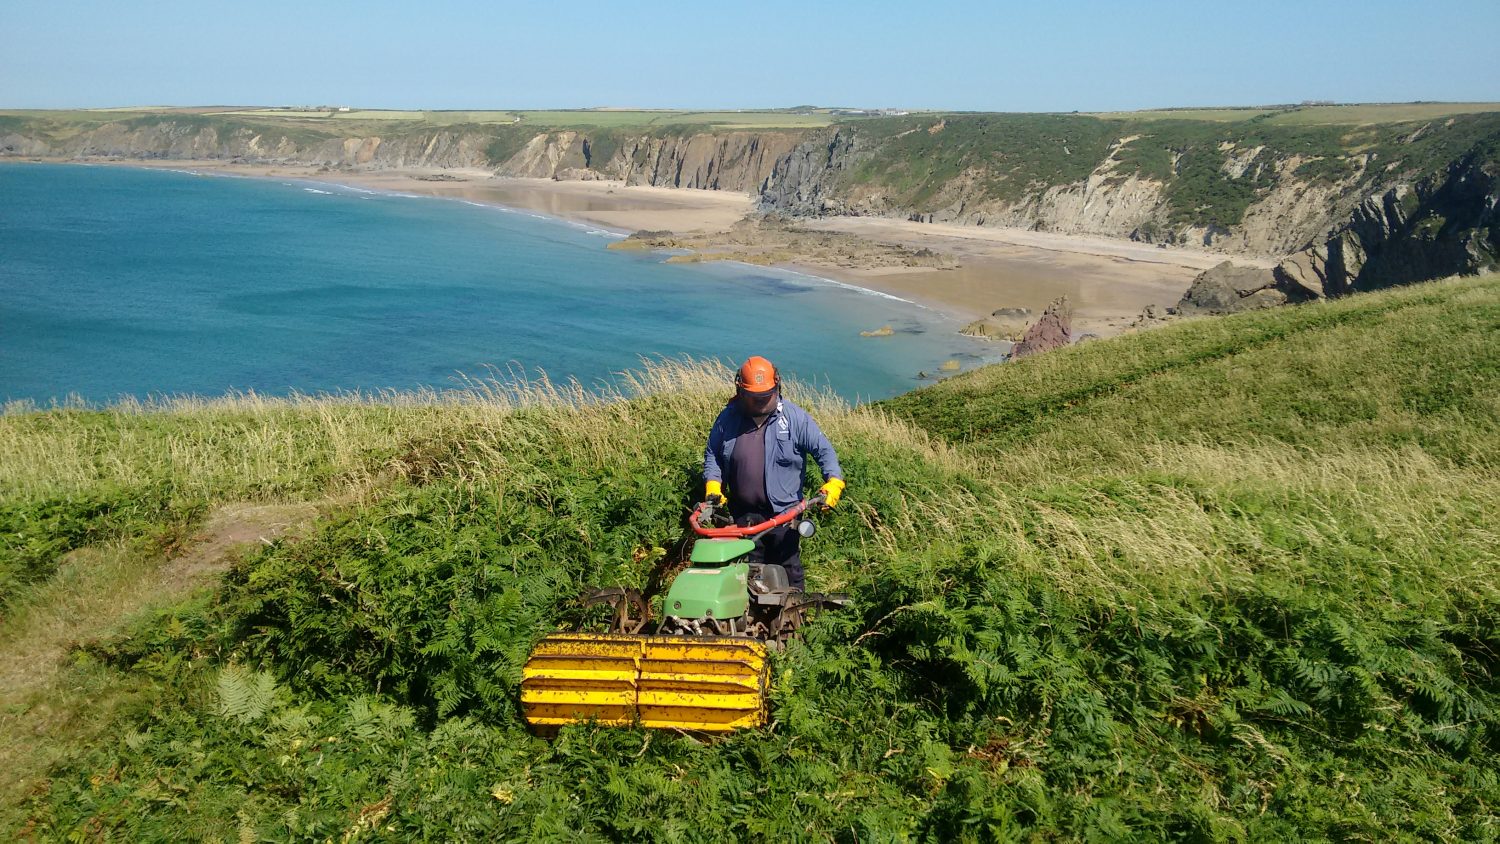 National Park Authority Warden using machine on Coast Path near Marloes Sands